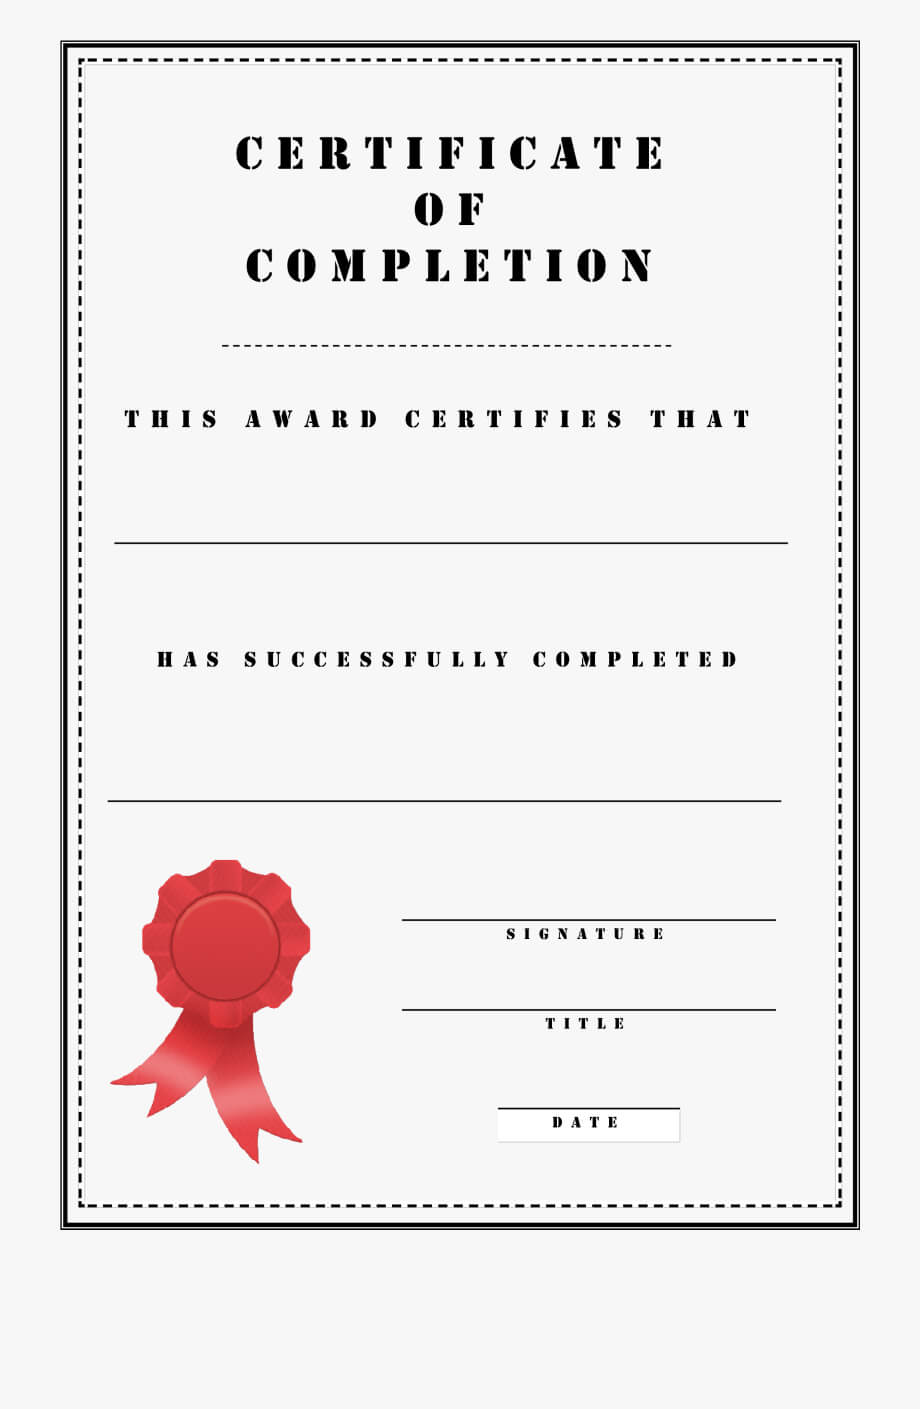 Clip Art Printable Employee Of The Month Certificate For Employee Of The Month Certificate Templates